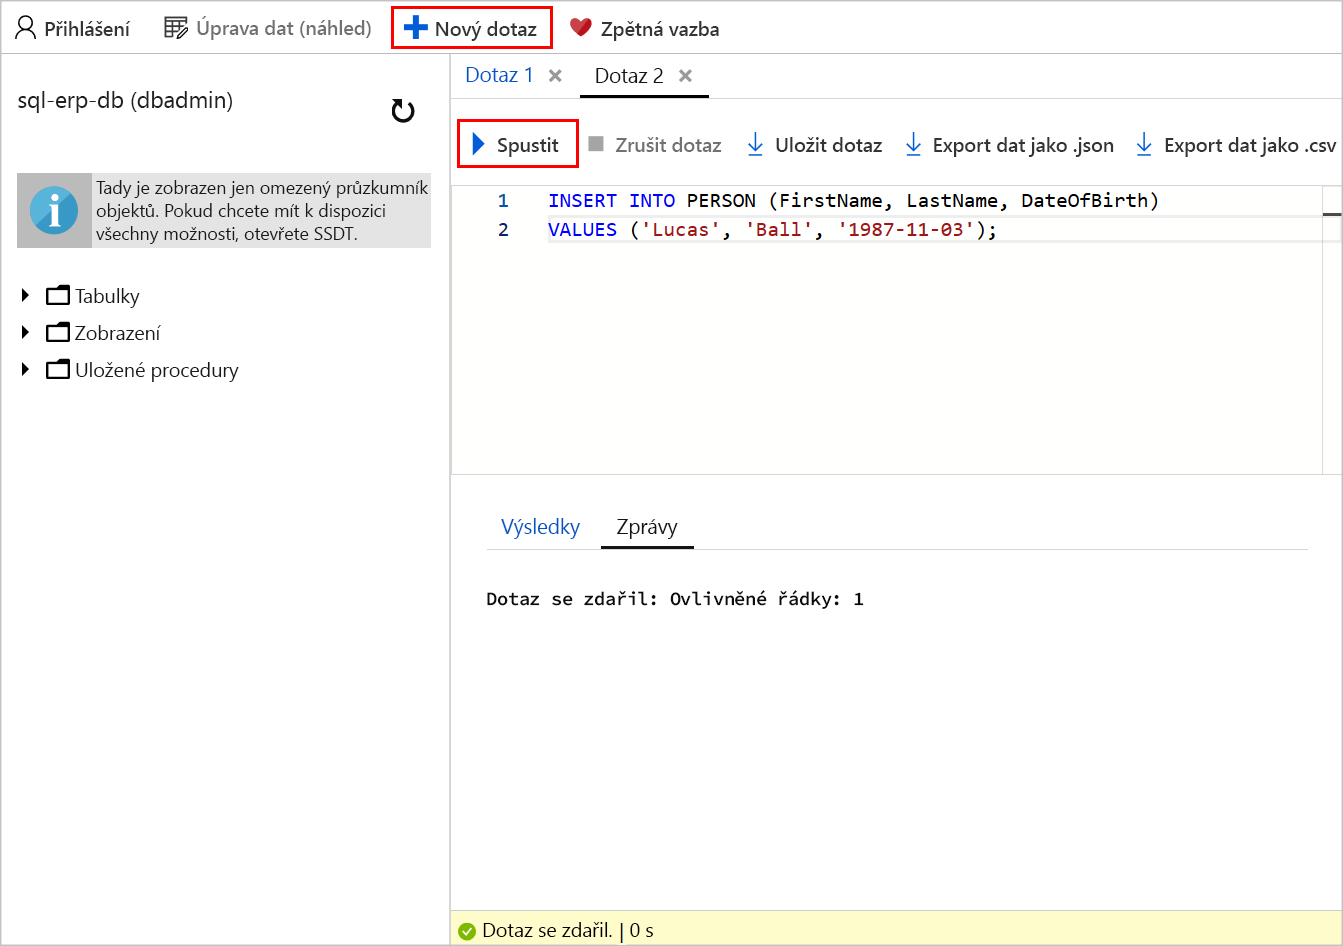 Screenshot of the query editor with T-SQL to insert a record into the Person table of the sql-erp-db database. A callout highlights the run button.